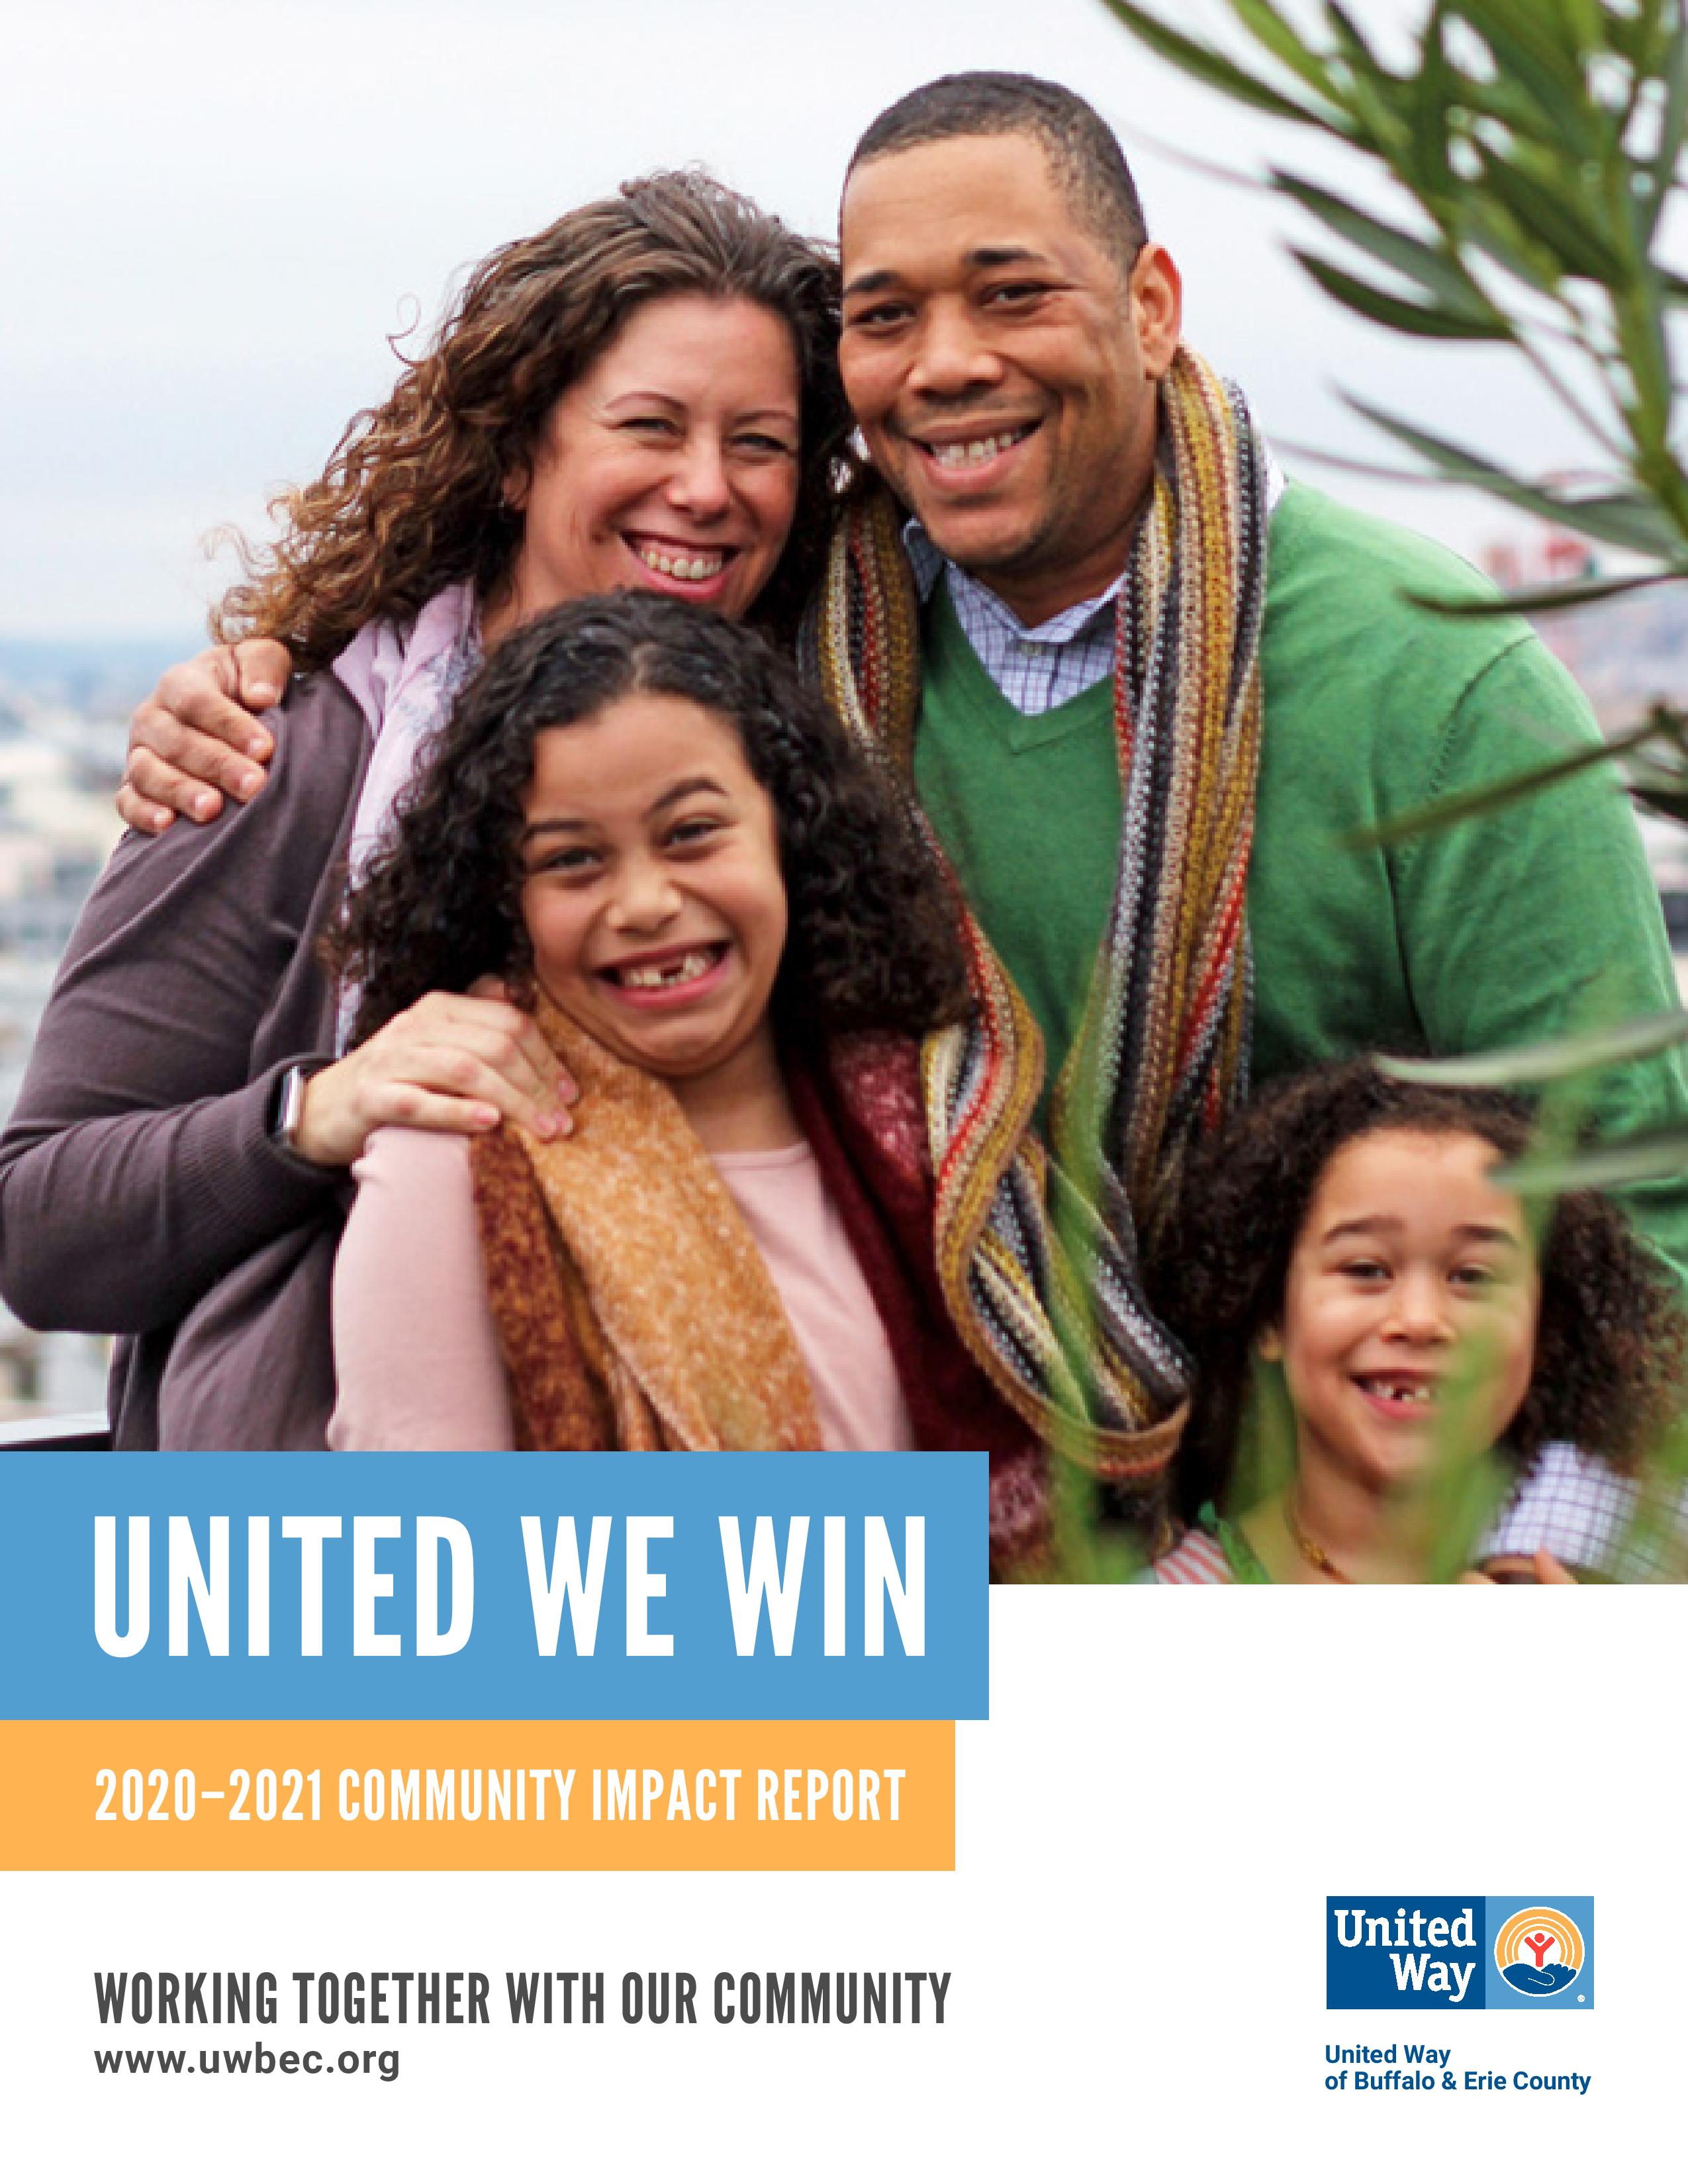 Our 2020-2021 Community Impact Report Image